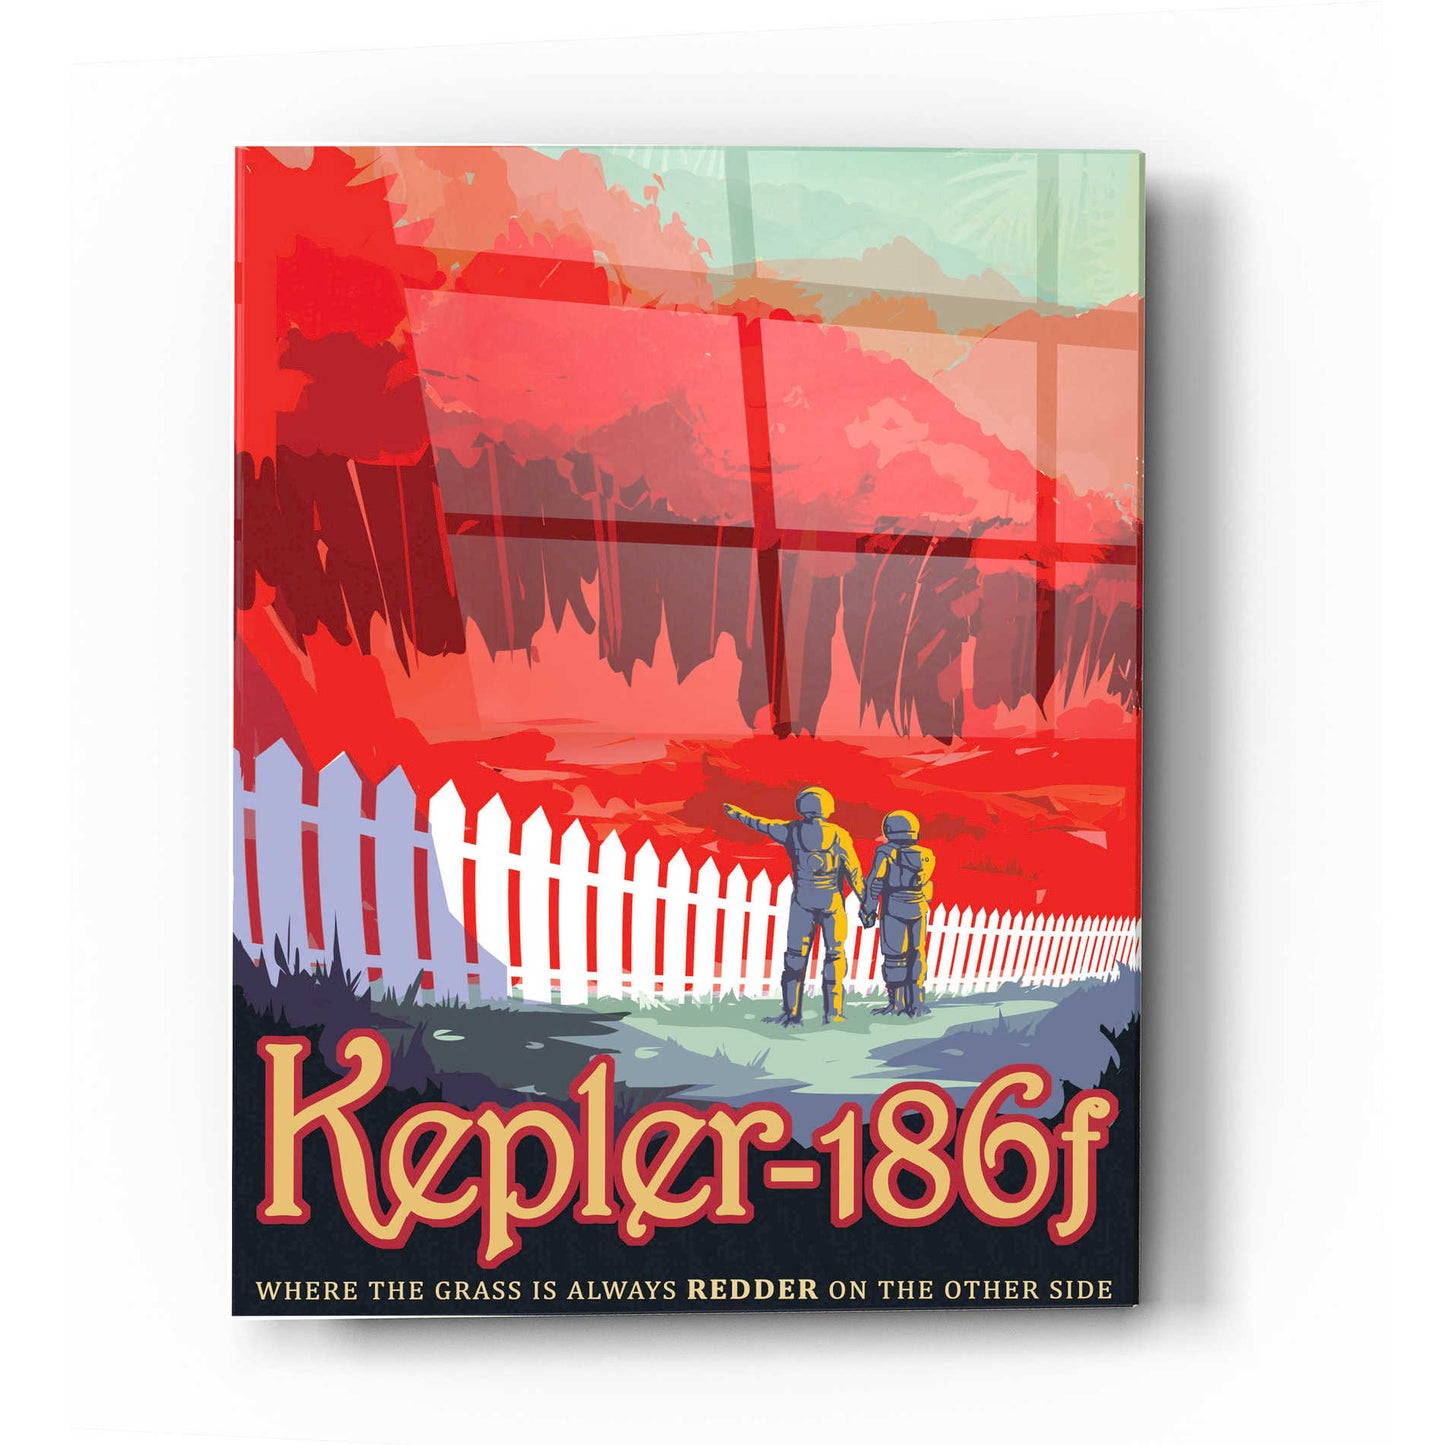 Epic Art 'Visions of the Future: Kepler-186f' Acrylic Glass Wall Art,16x24